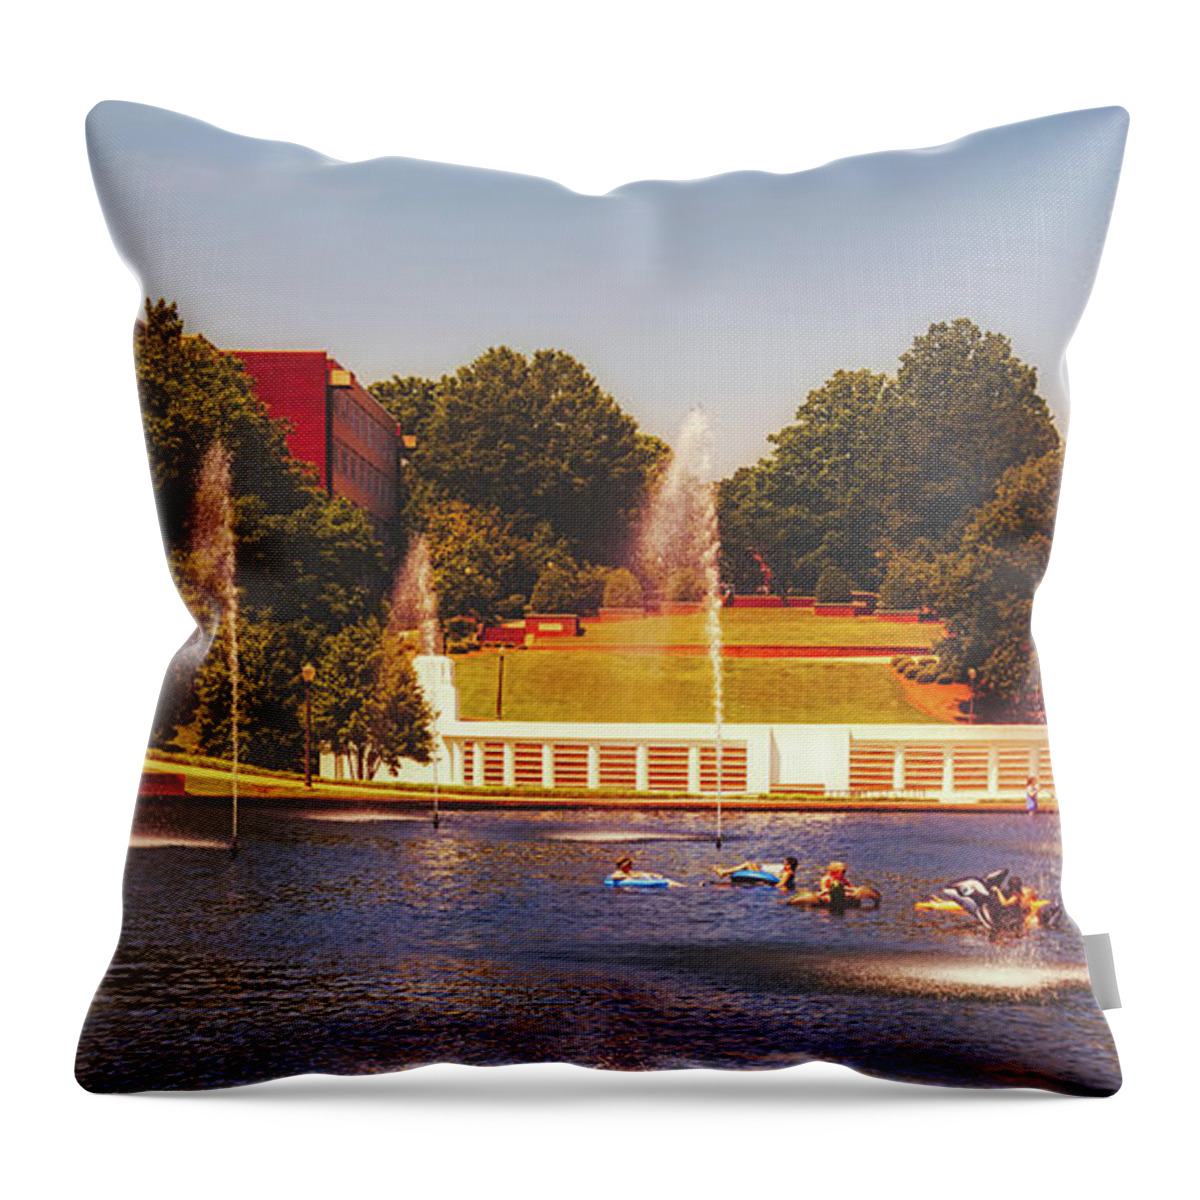 Clemson University Throw Pillow featuring the photograph The Reflection Pond - Clemson University #1 by Mountain Dreams